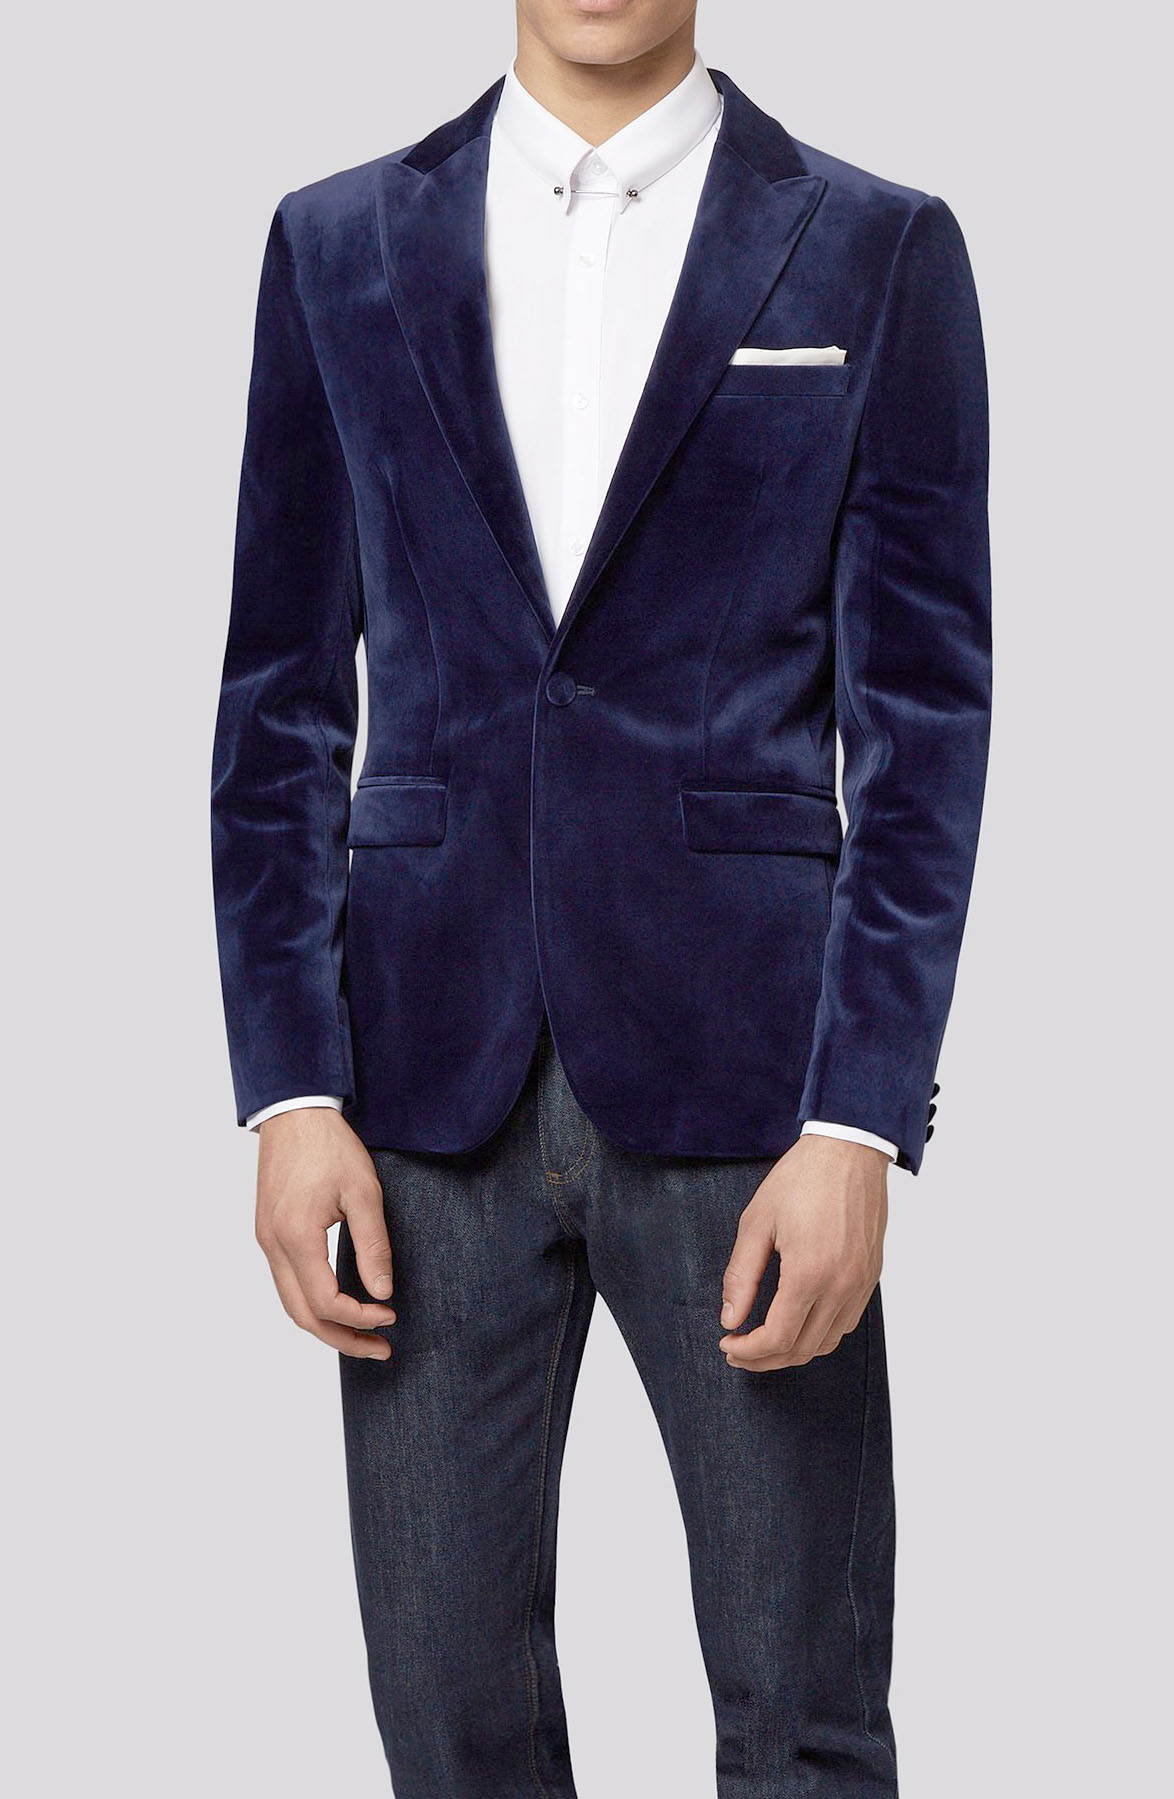 Blue Velvet Dinner Jacket for The Holidays, Parties & Luxury Events 